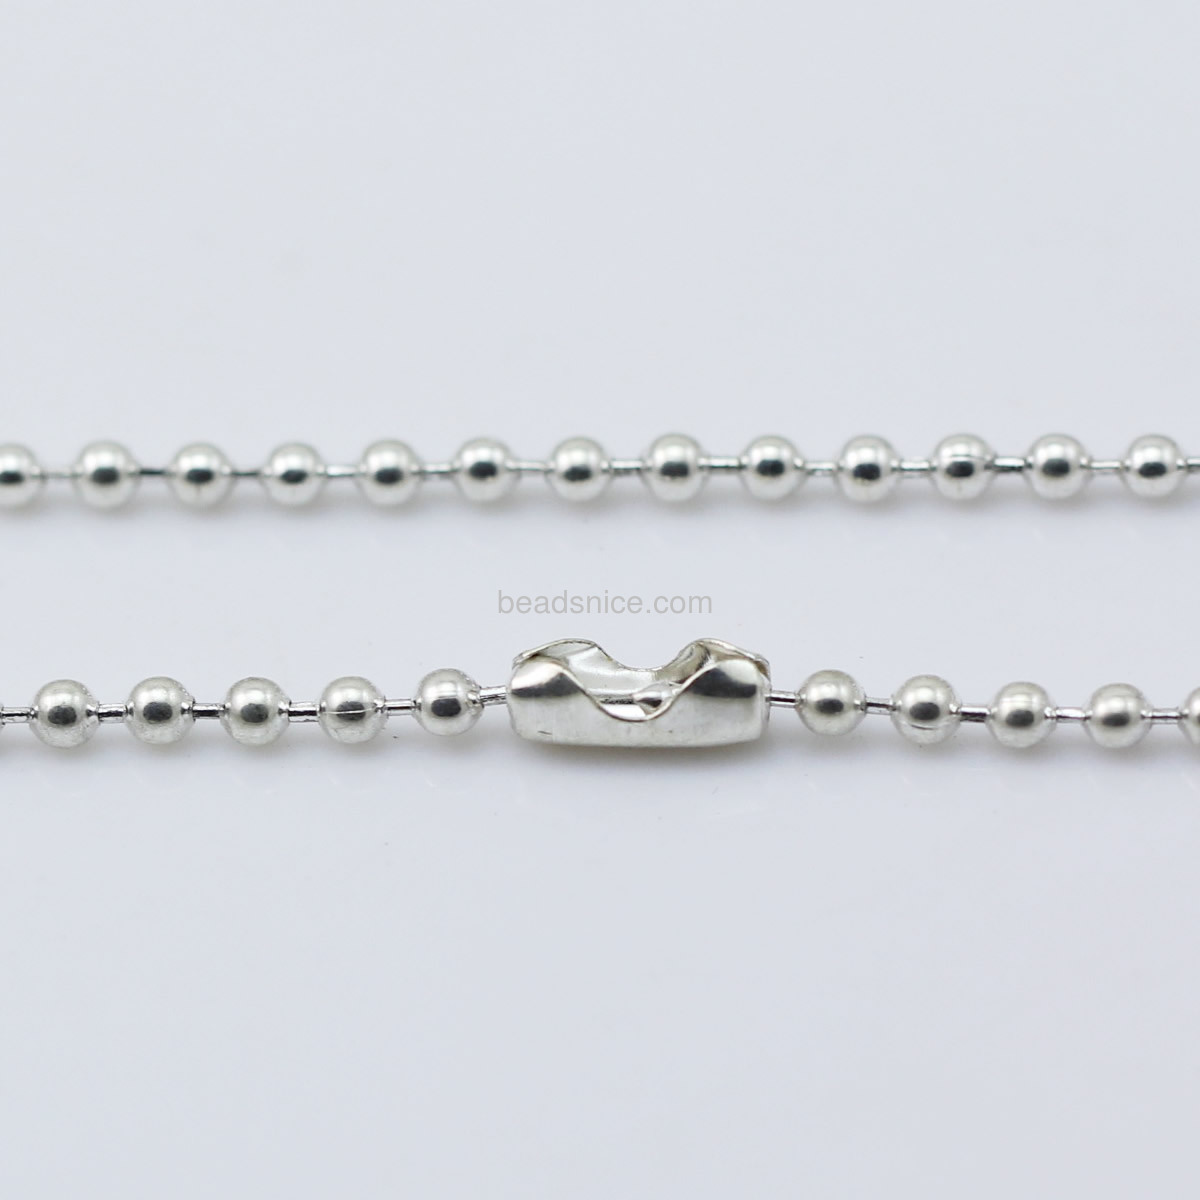 Iron necklace chain,length 24 inch,2.4mm thick,nickel free,